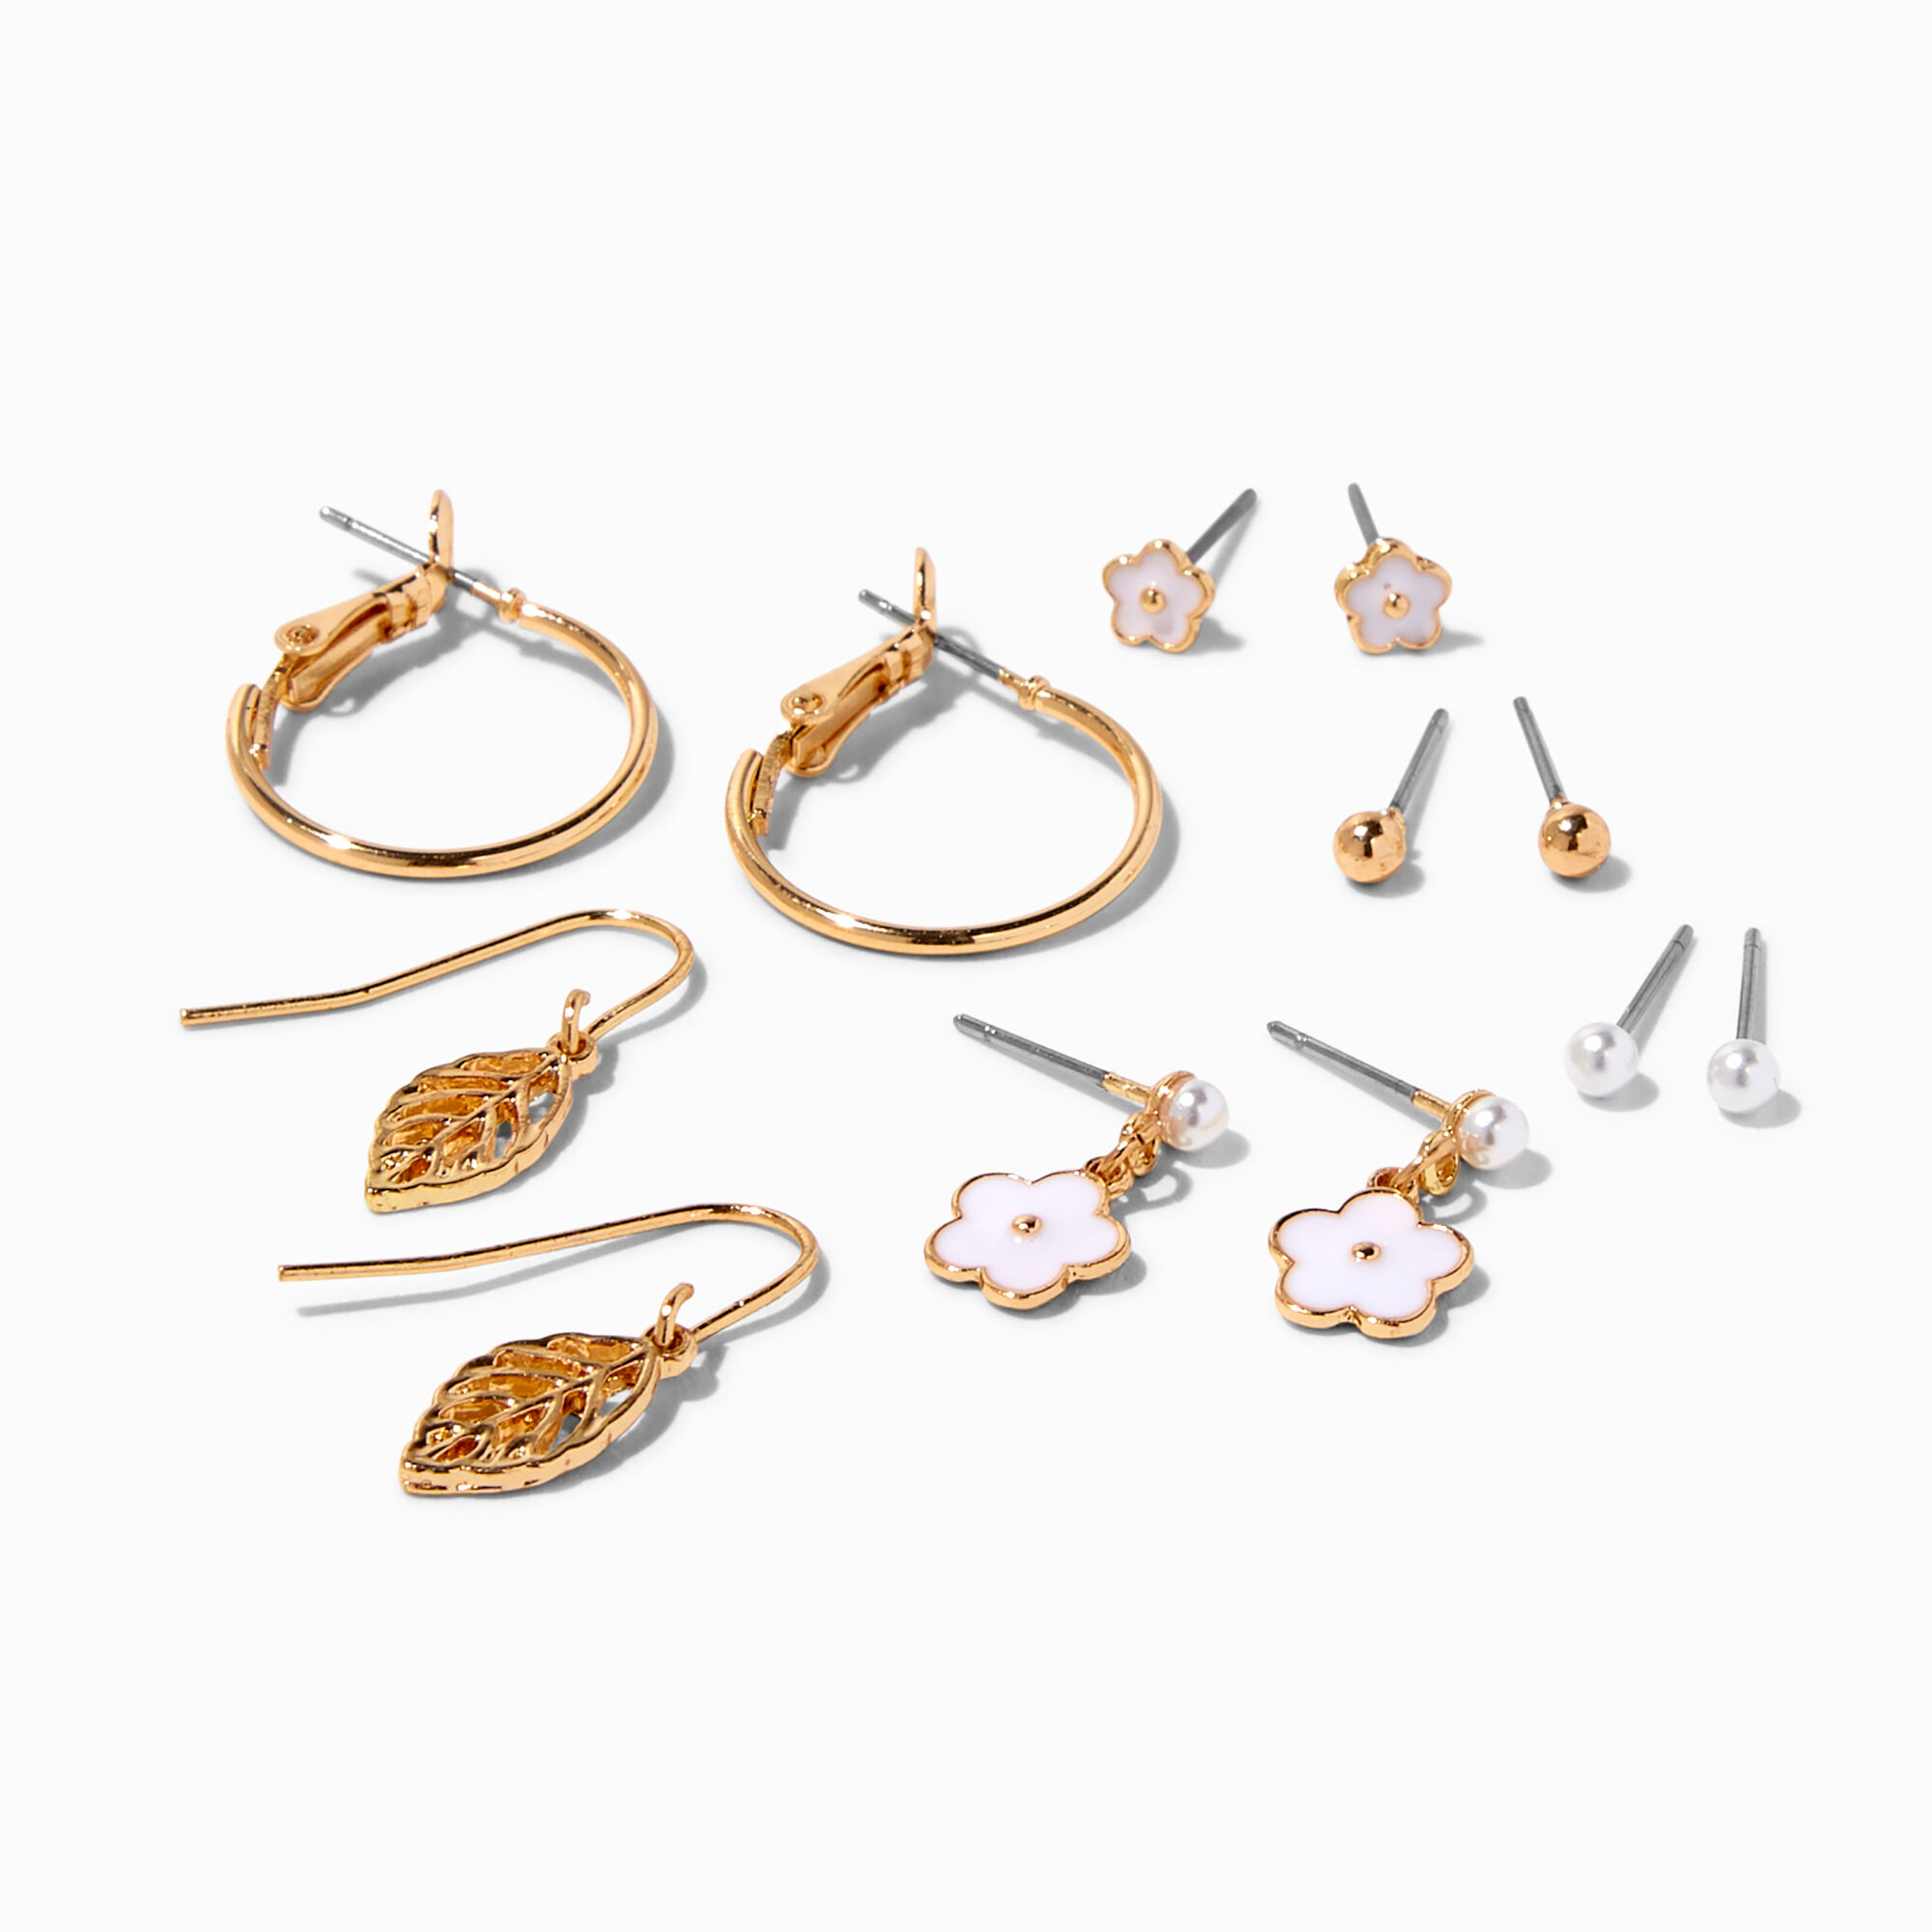 View Claires Tone Leaf Flower Earrings Set 6 Pack Gold information